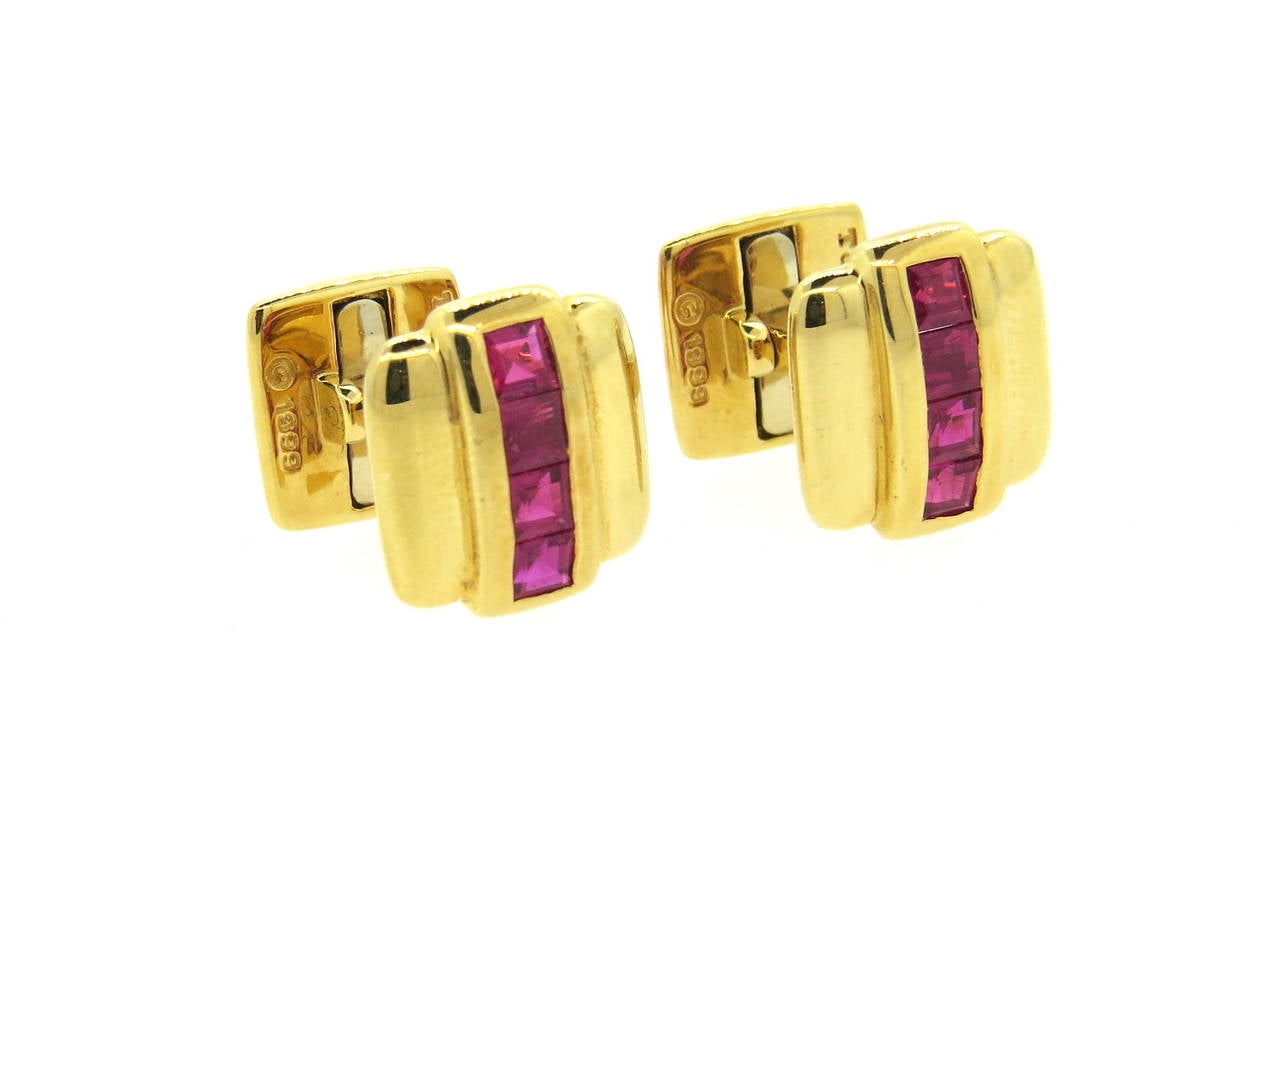 Circa 1999 18k yellow gold cufflinks, crafted by Tiffany & Co, each set with four square cut rubies. Cufflink top measures 13.7mm x 12.7mm. Marked T & Co,1999,750. Weight - 15.9 grams